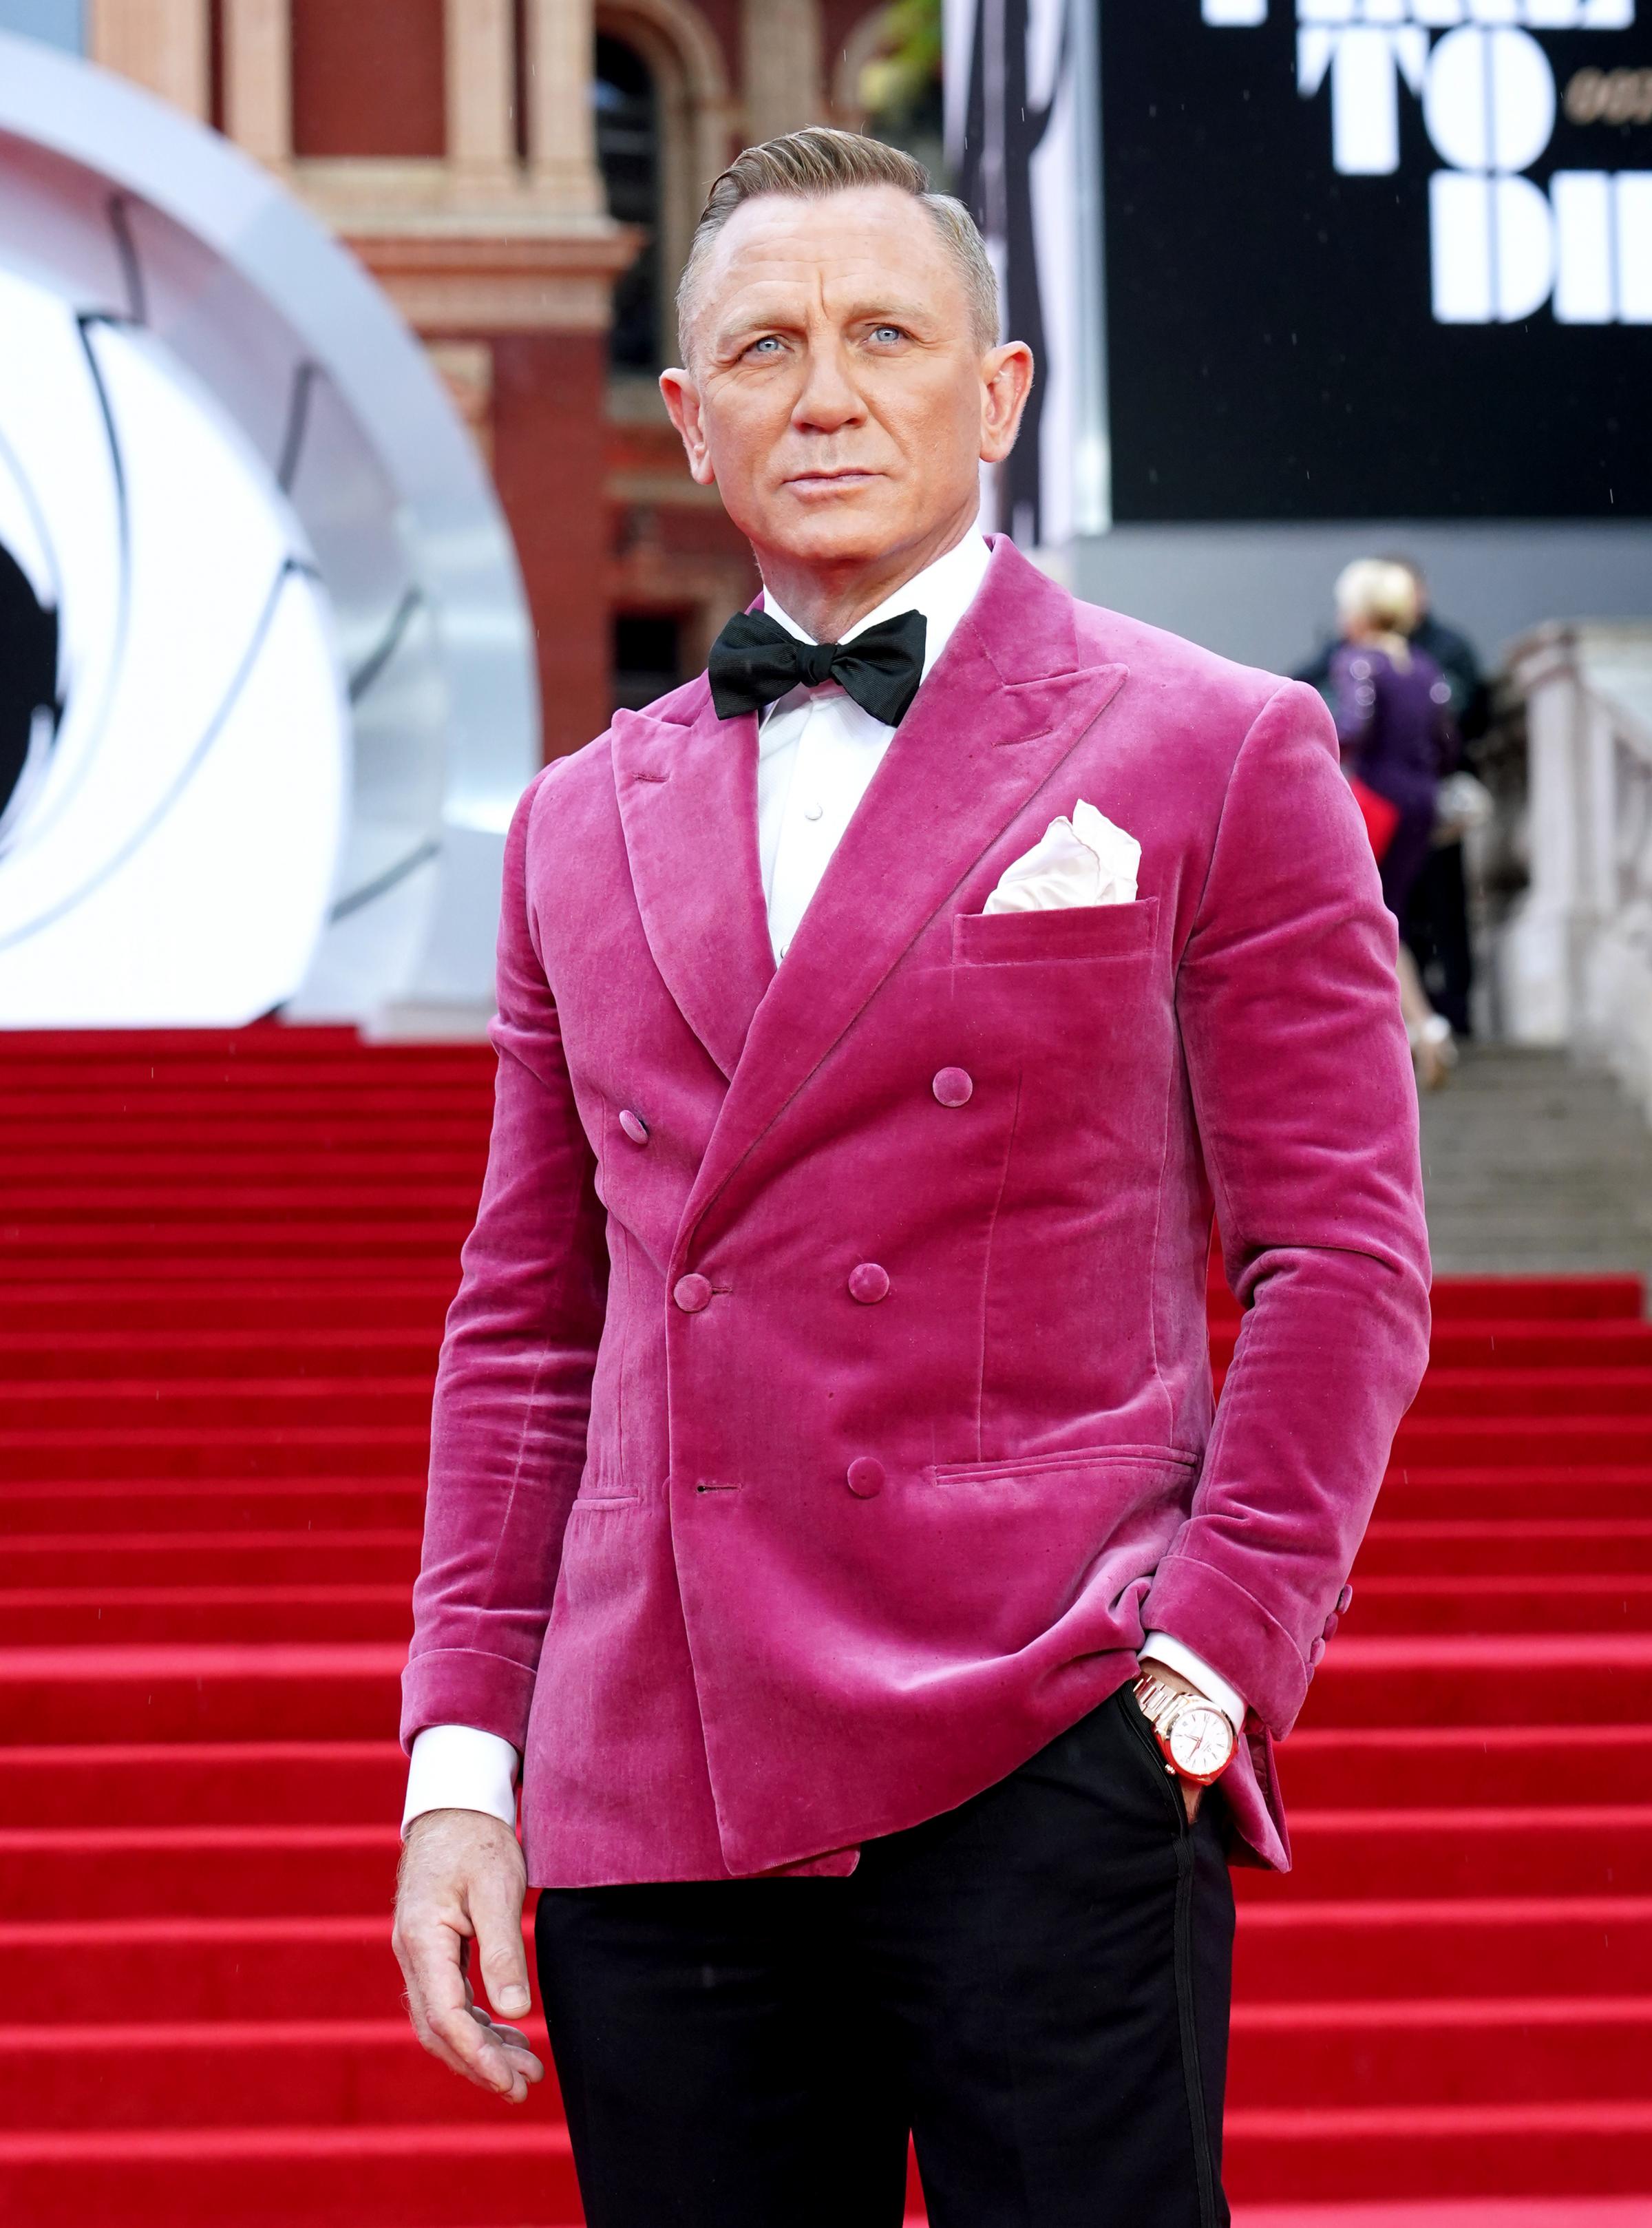 Daniel Craig attending the World Premiere of No Time To Die at the Royal Albert Hall Photo: PA